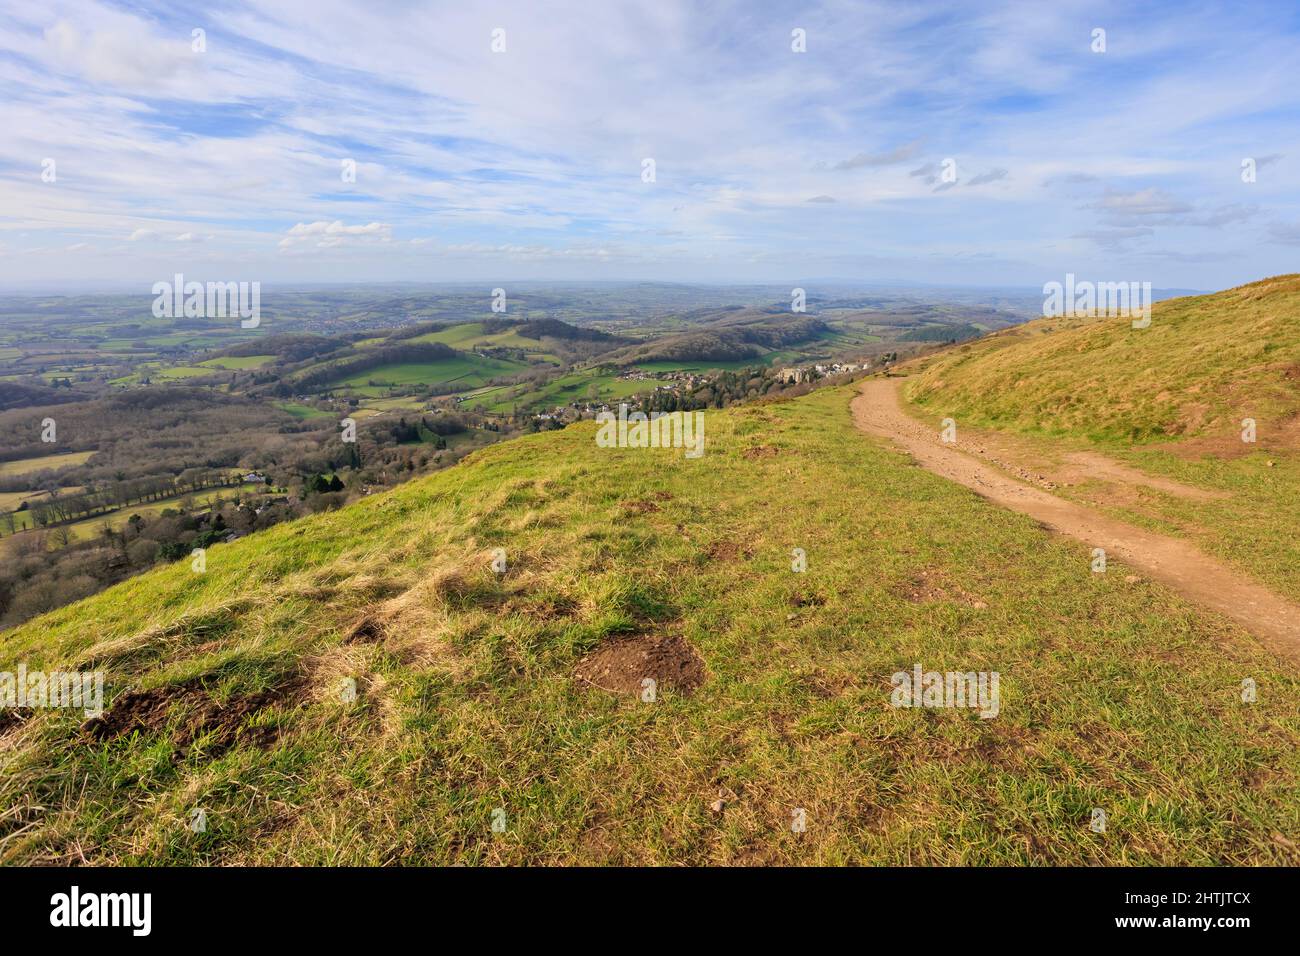 Views along the ridge top of the Malvern Hills in Worcestershire and Hereford with sunny skies and clear footpaths. Stock Photo